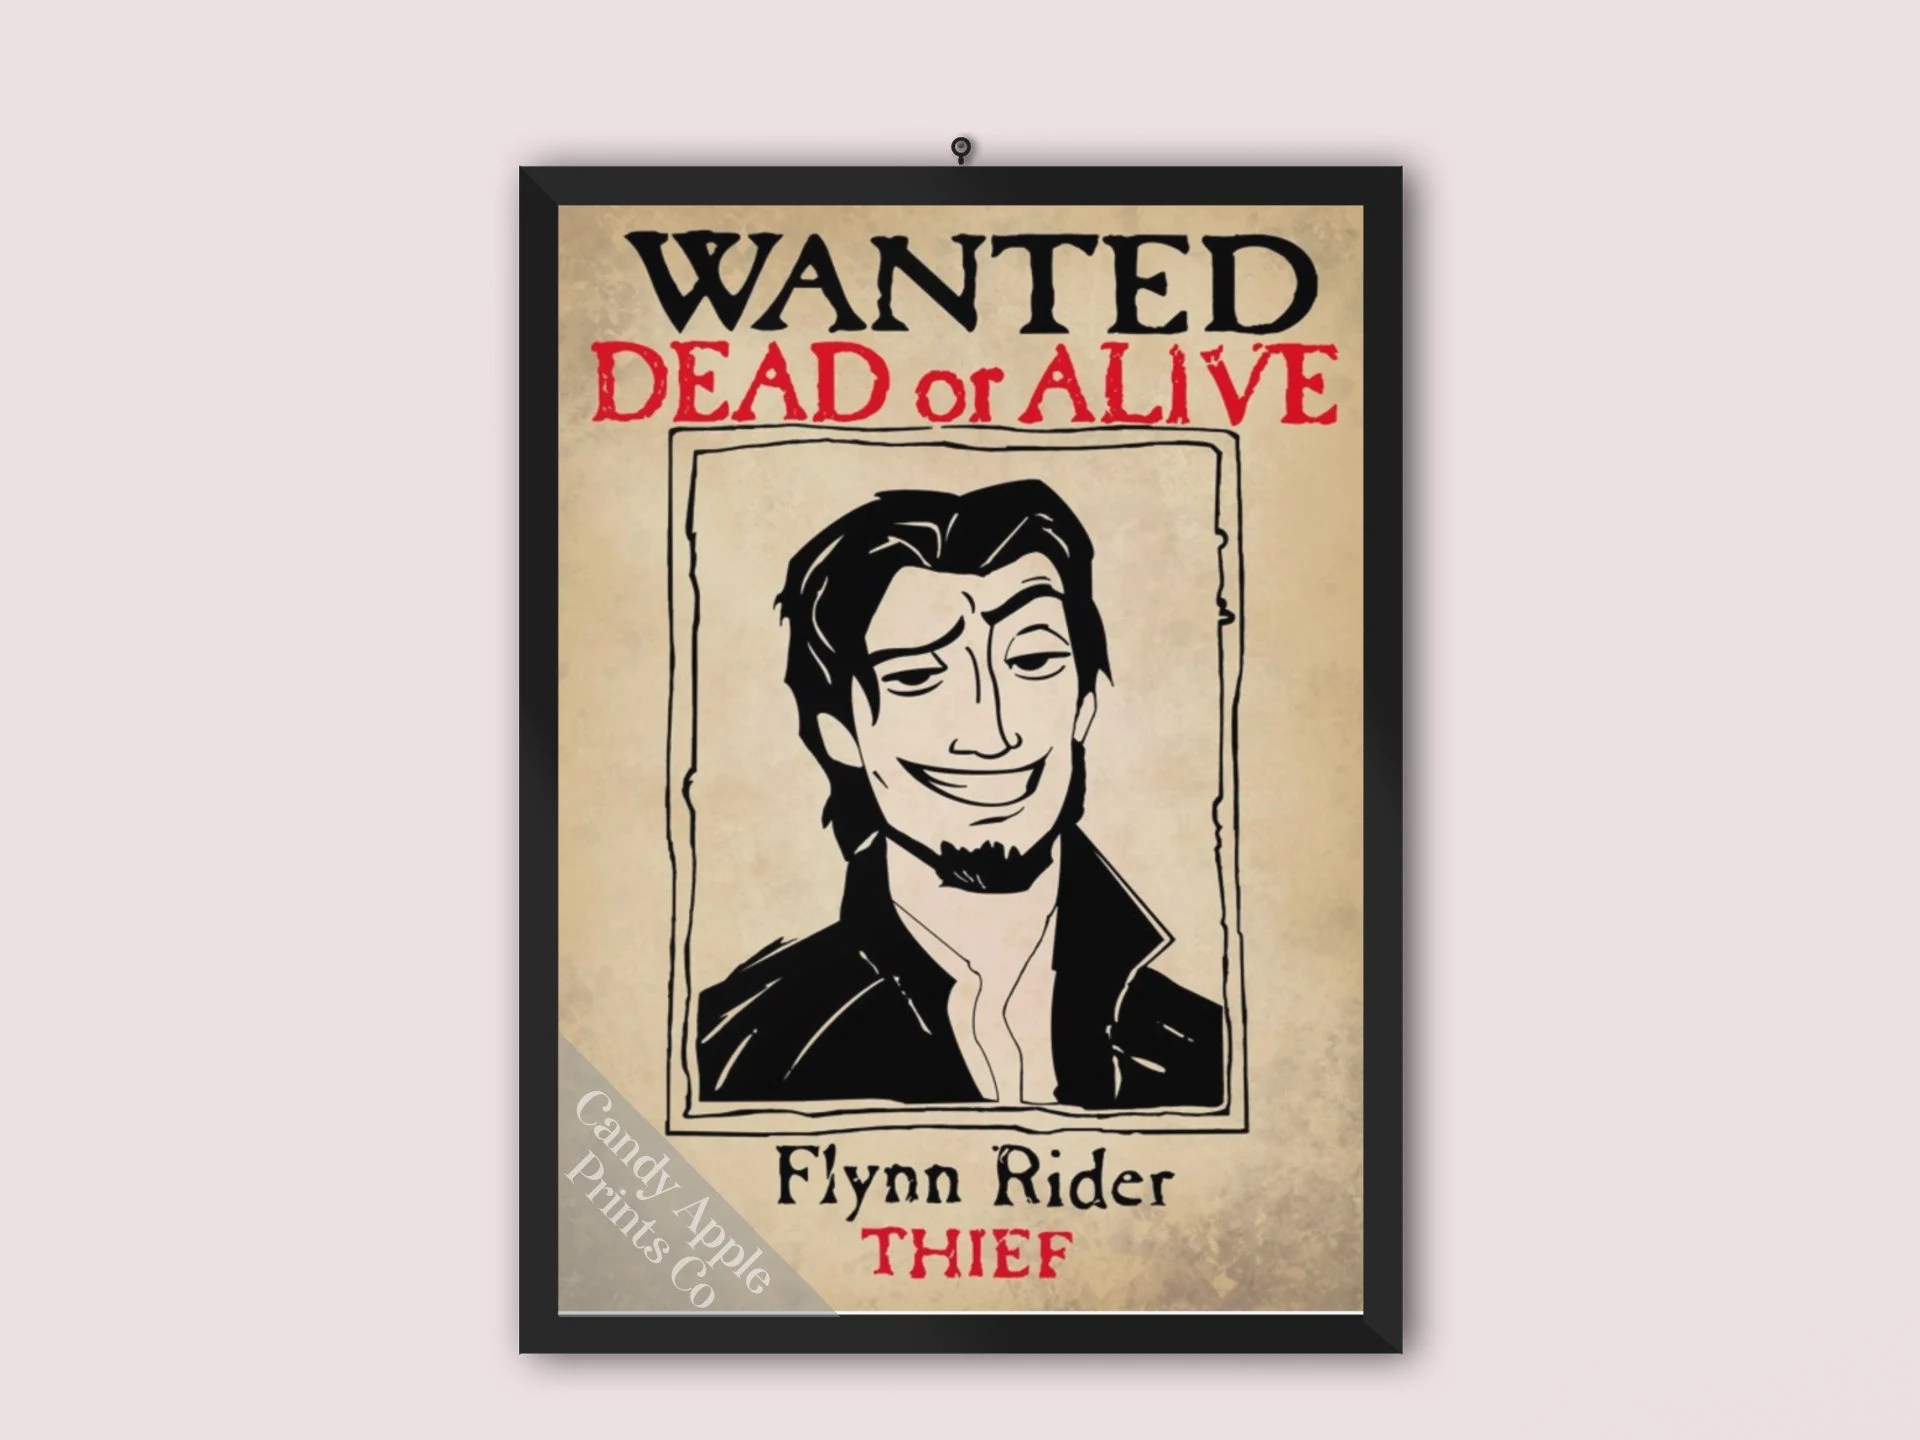 Flynn Rider Wanted Poster Printable with regard to Free Printable Flynn Rider Wanted Poster